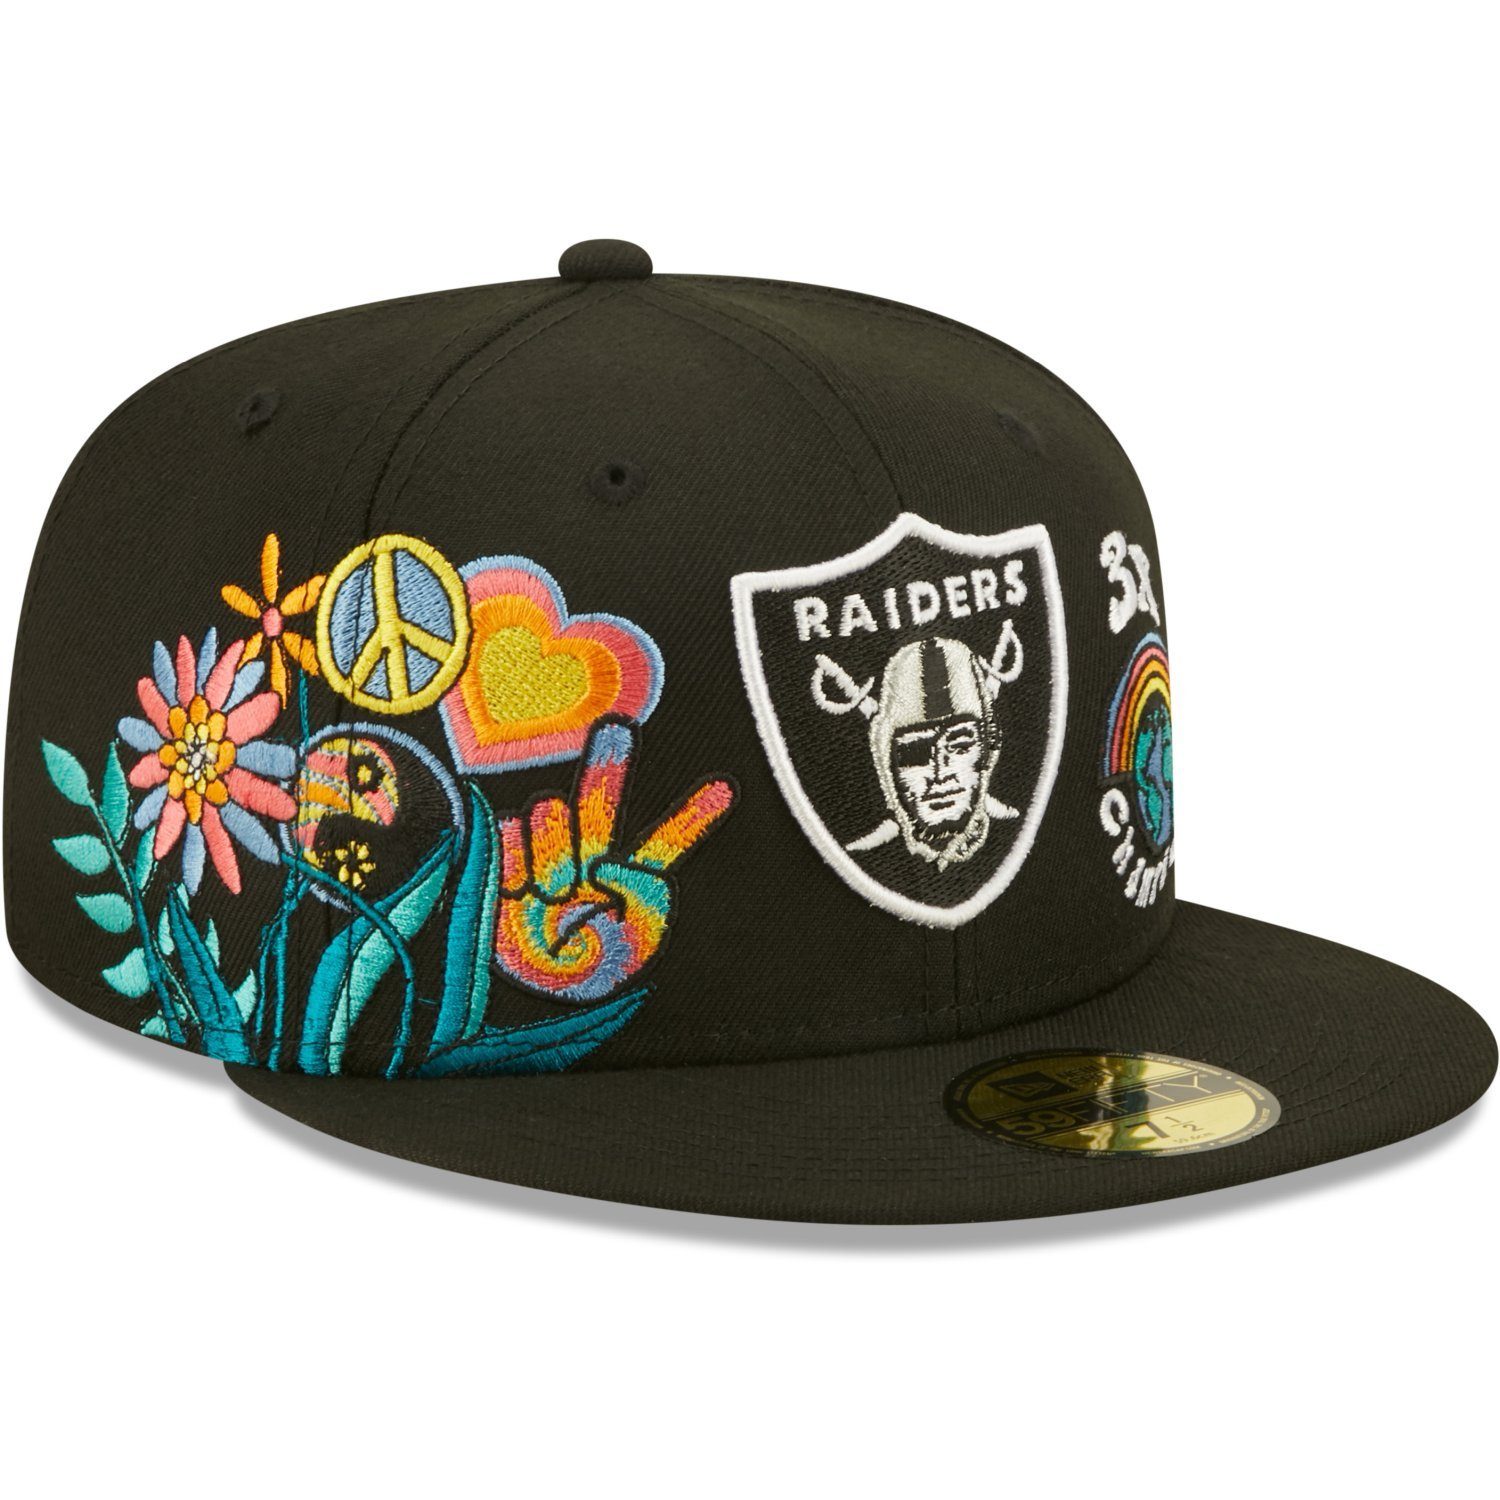 59Fifty New Era Raiders Cap Vegas Las Fitted GROOVY